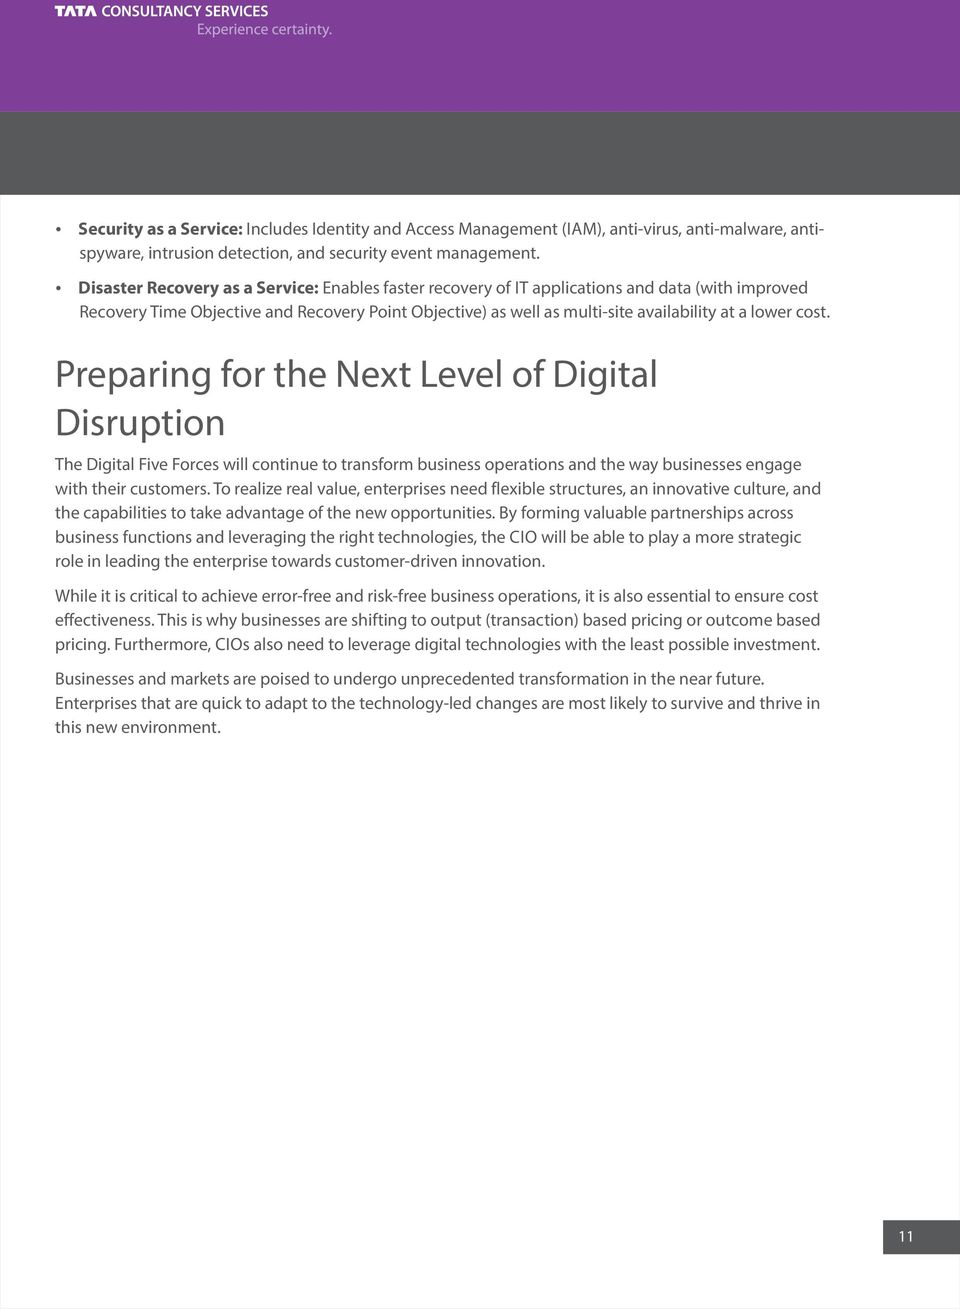 cost. Preparing for the Next Level of Digital Disruption The Digital Five Forces will continue to transform business operations and the way businesses engage with their customers.